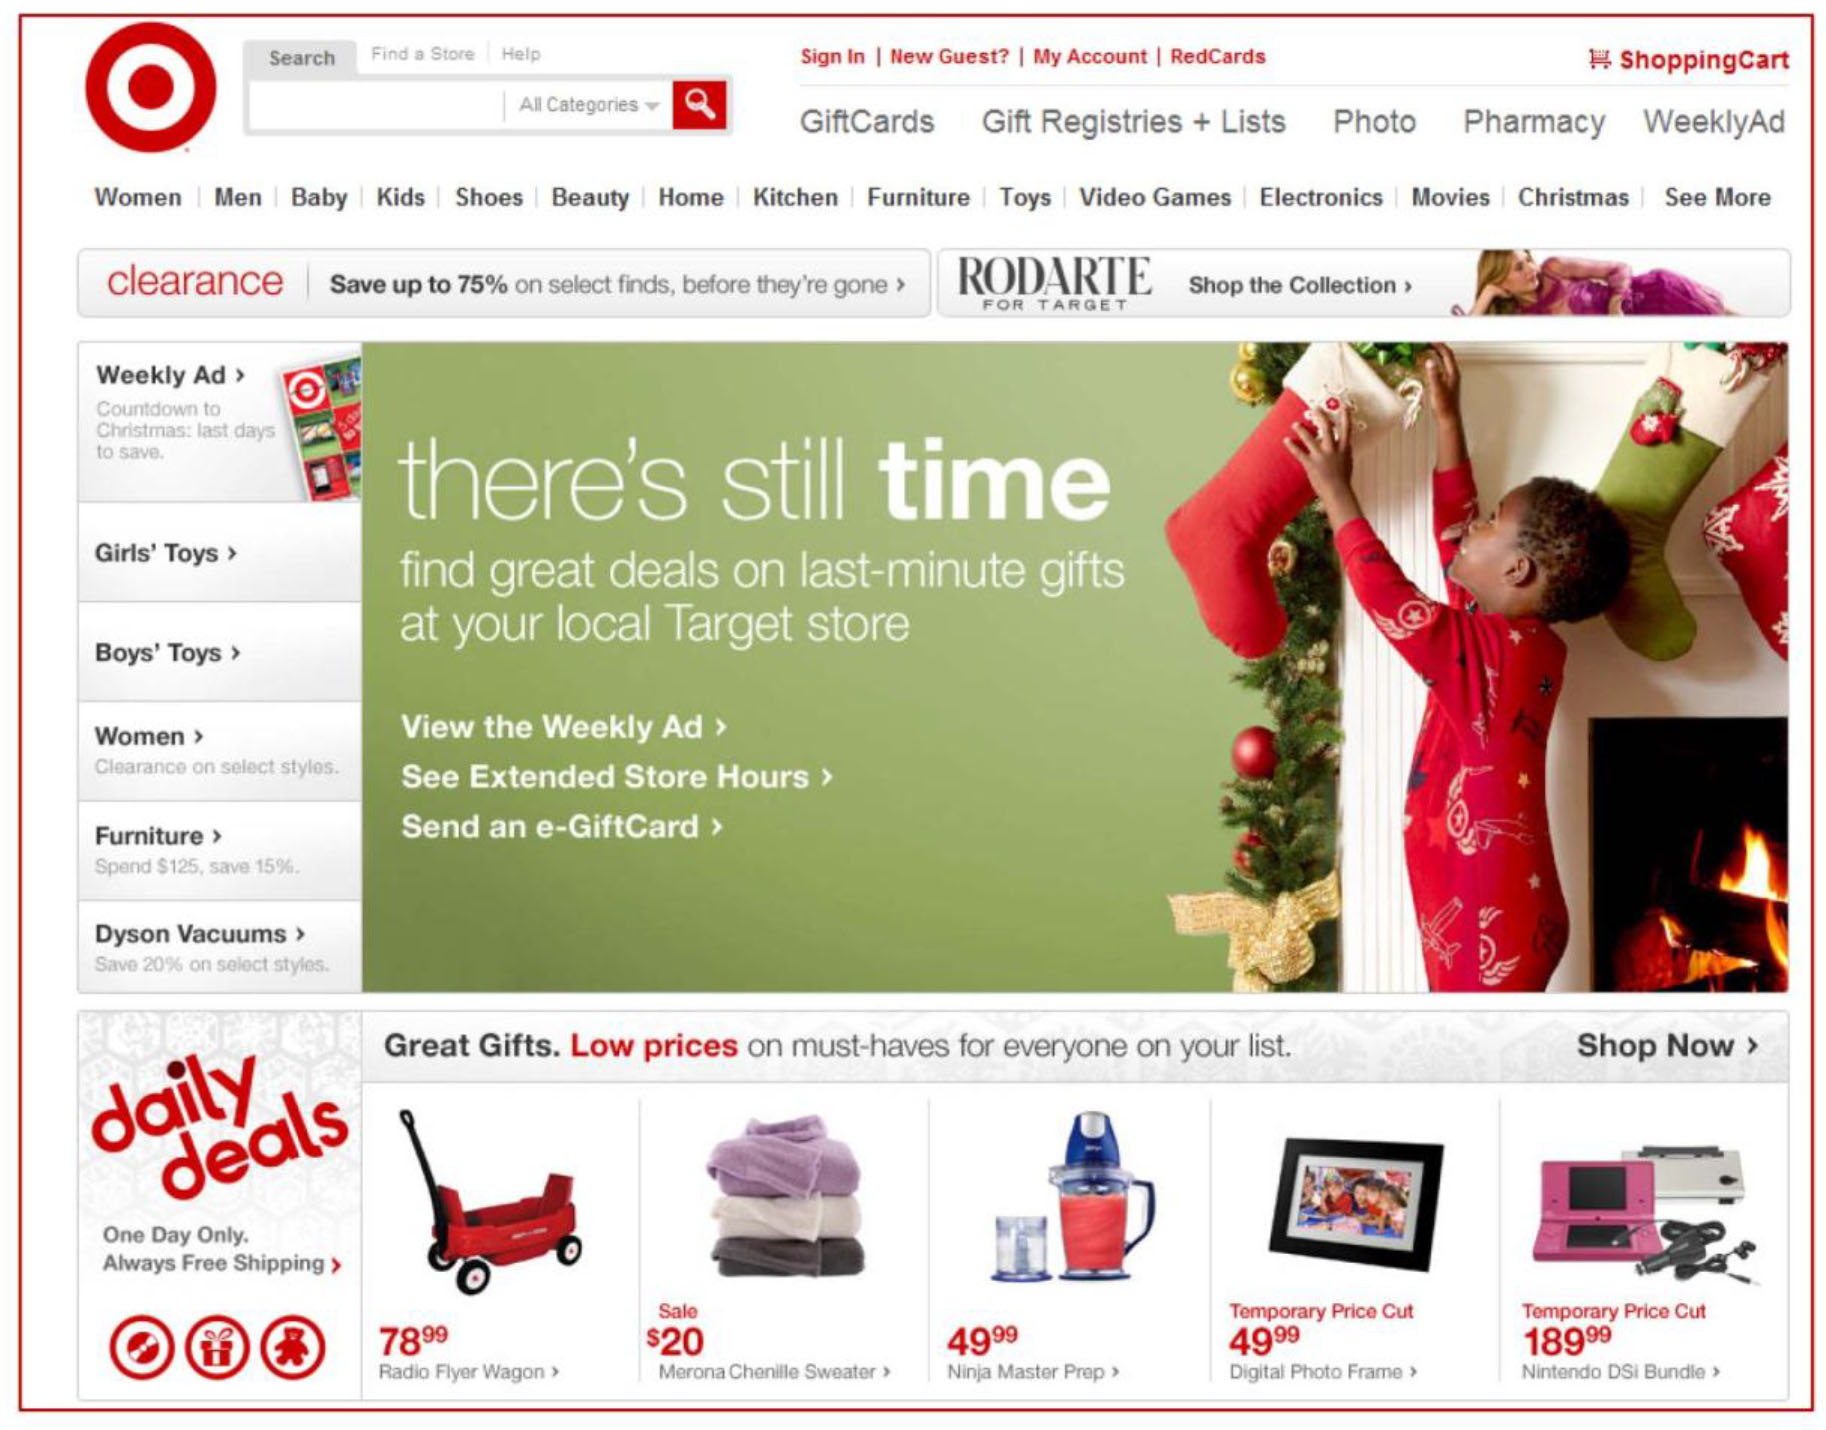 Target adds beloved brand Walmart, Costco, and Kroger don't sell, Thestreet